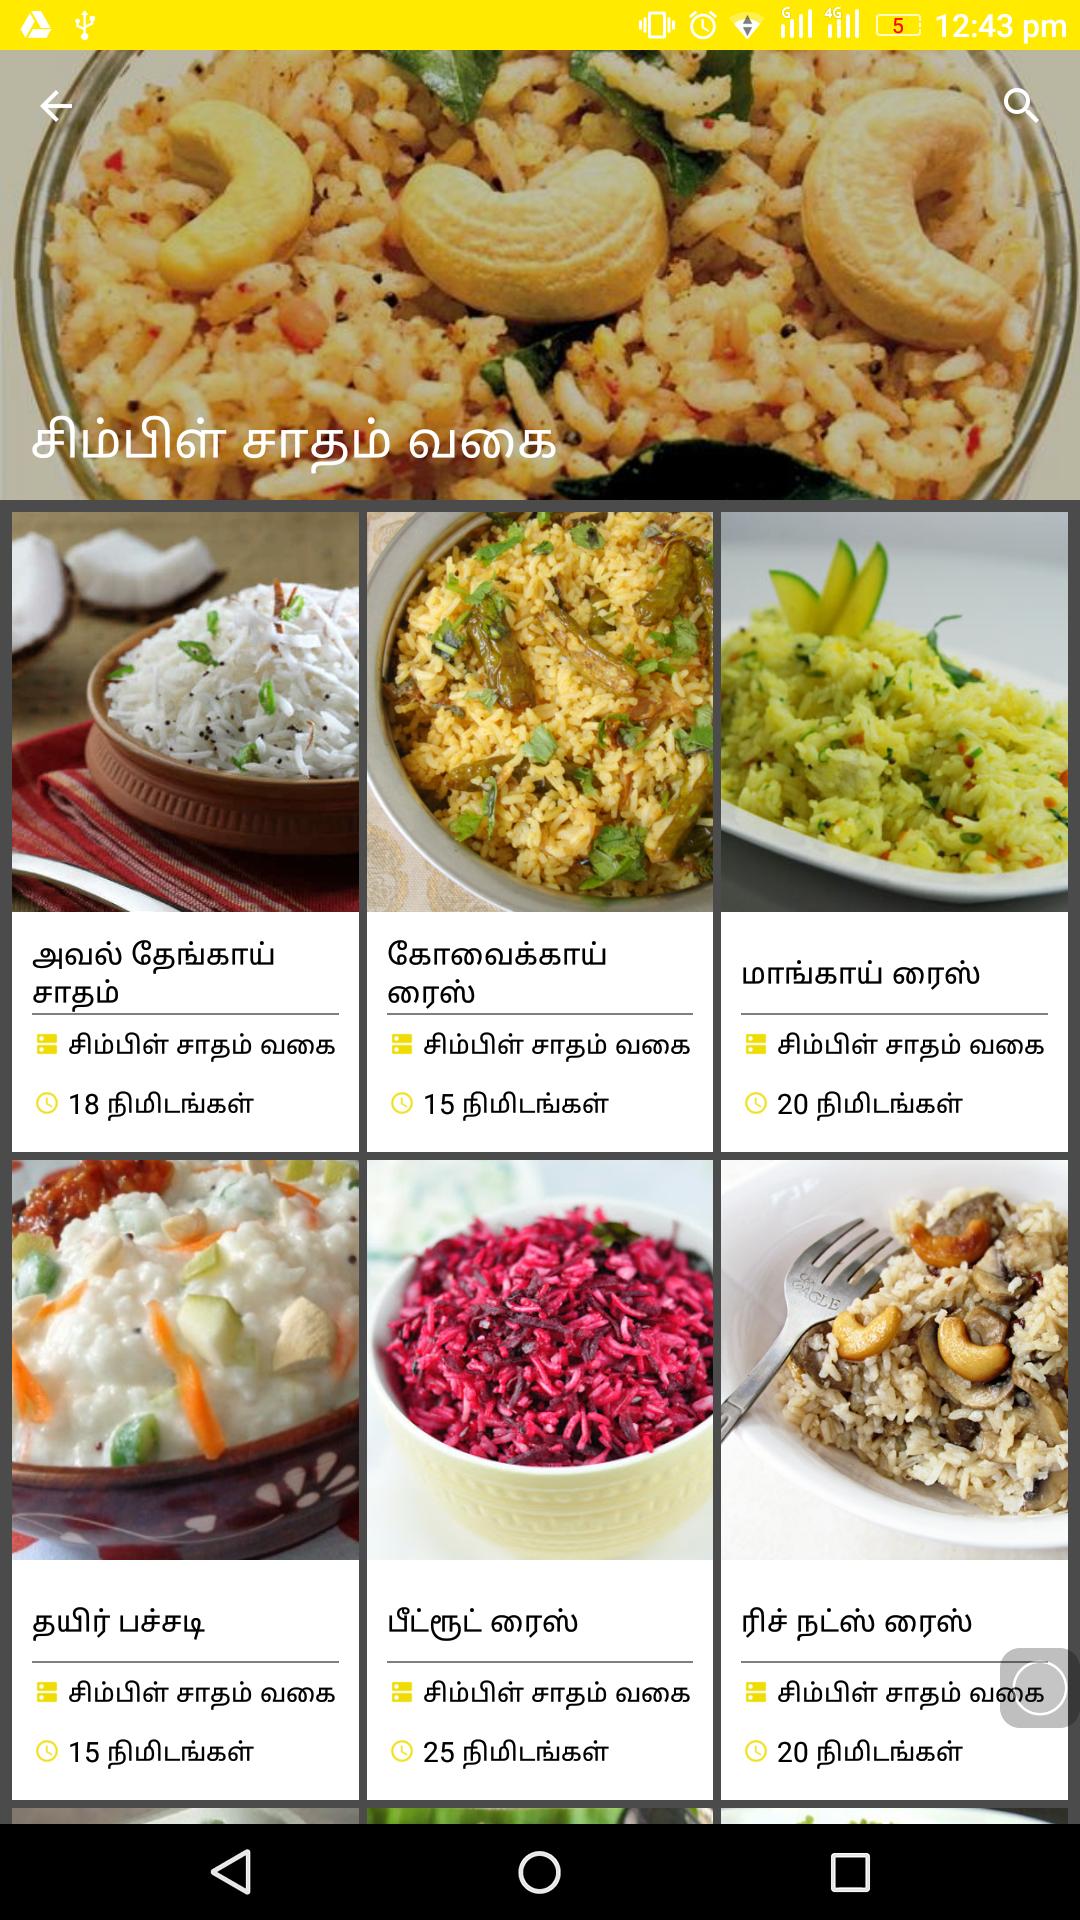 Easy Cooking Recipes In Tamil / Amazon Com 1100 Veg Food Recipes In Tamil Saiva Samayal à® à®µ à®à®® à®¯à®² Tamil Edition Ebook T Abinaya Kindle Store : Over 280 traditional, authentic, home cooked and tested recipes from different parts of india's southern state, i.e.